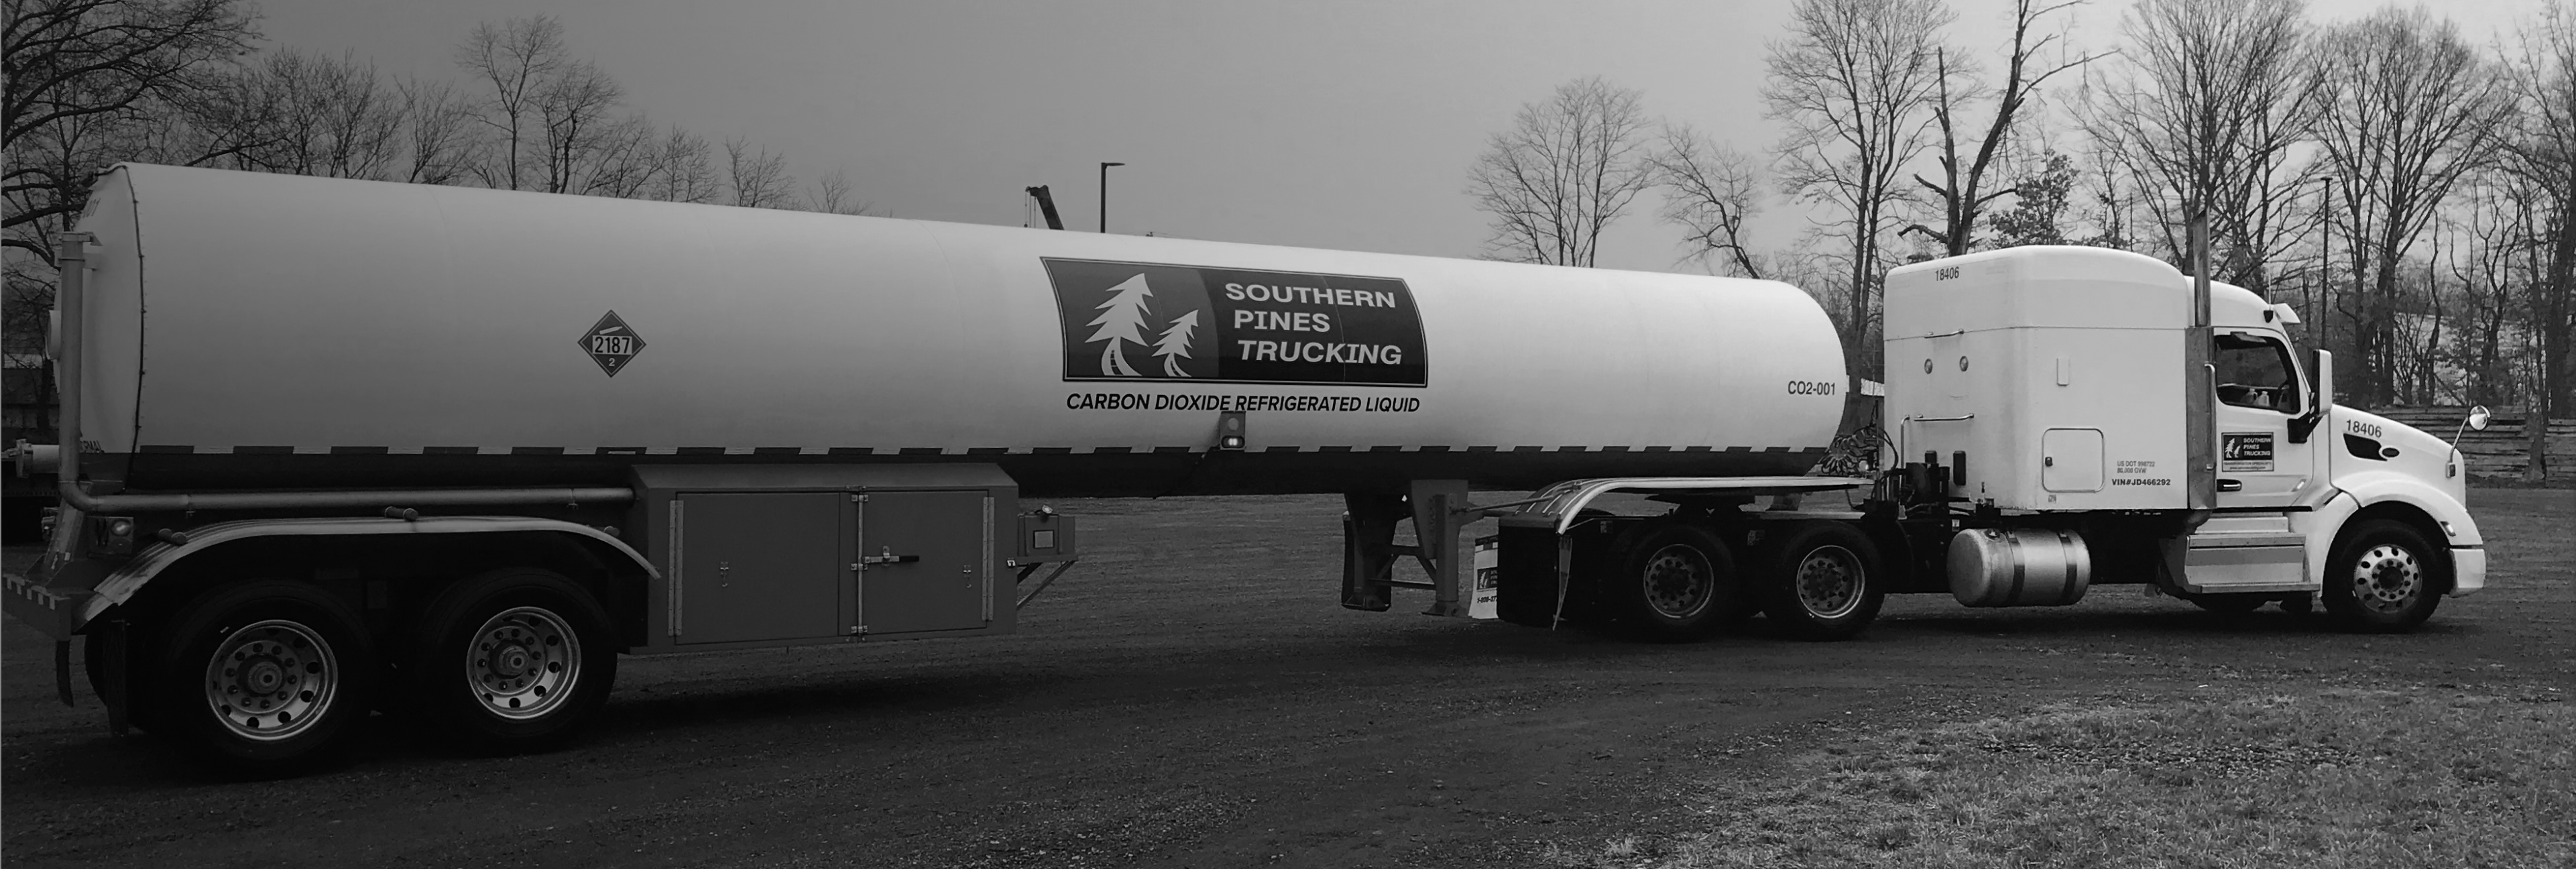 tanker trucking companies that hire students